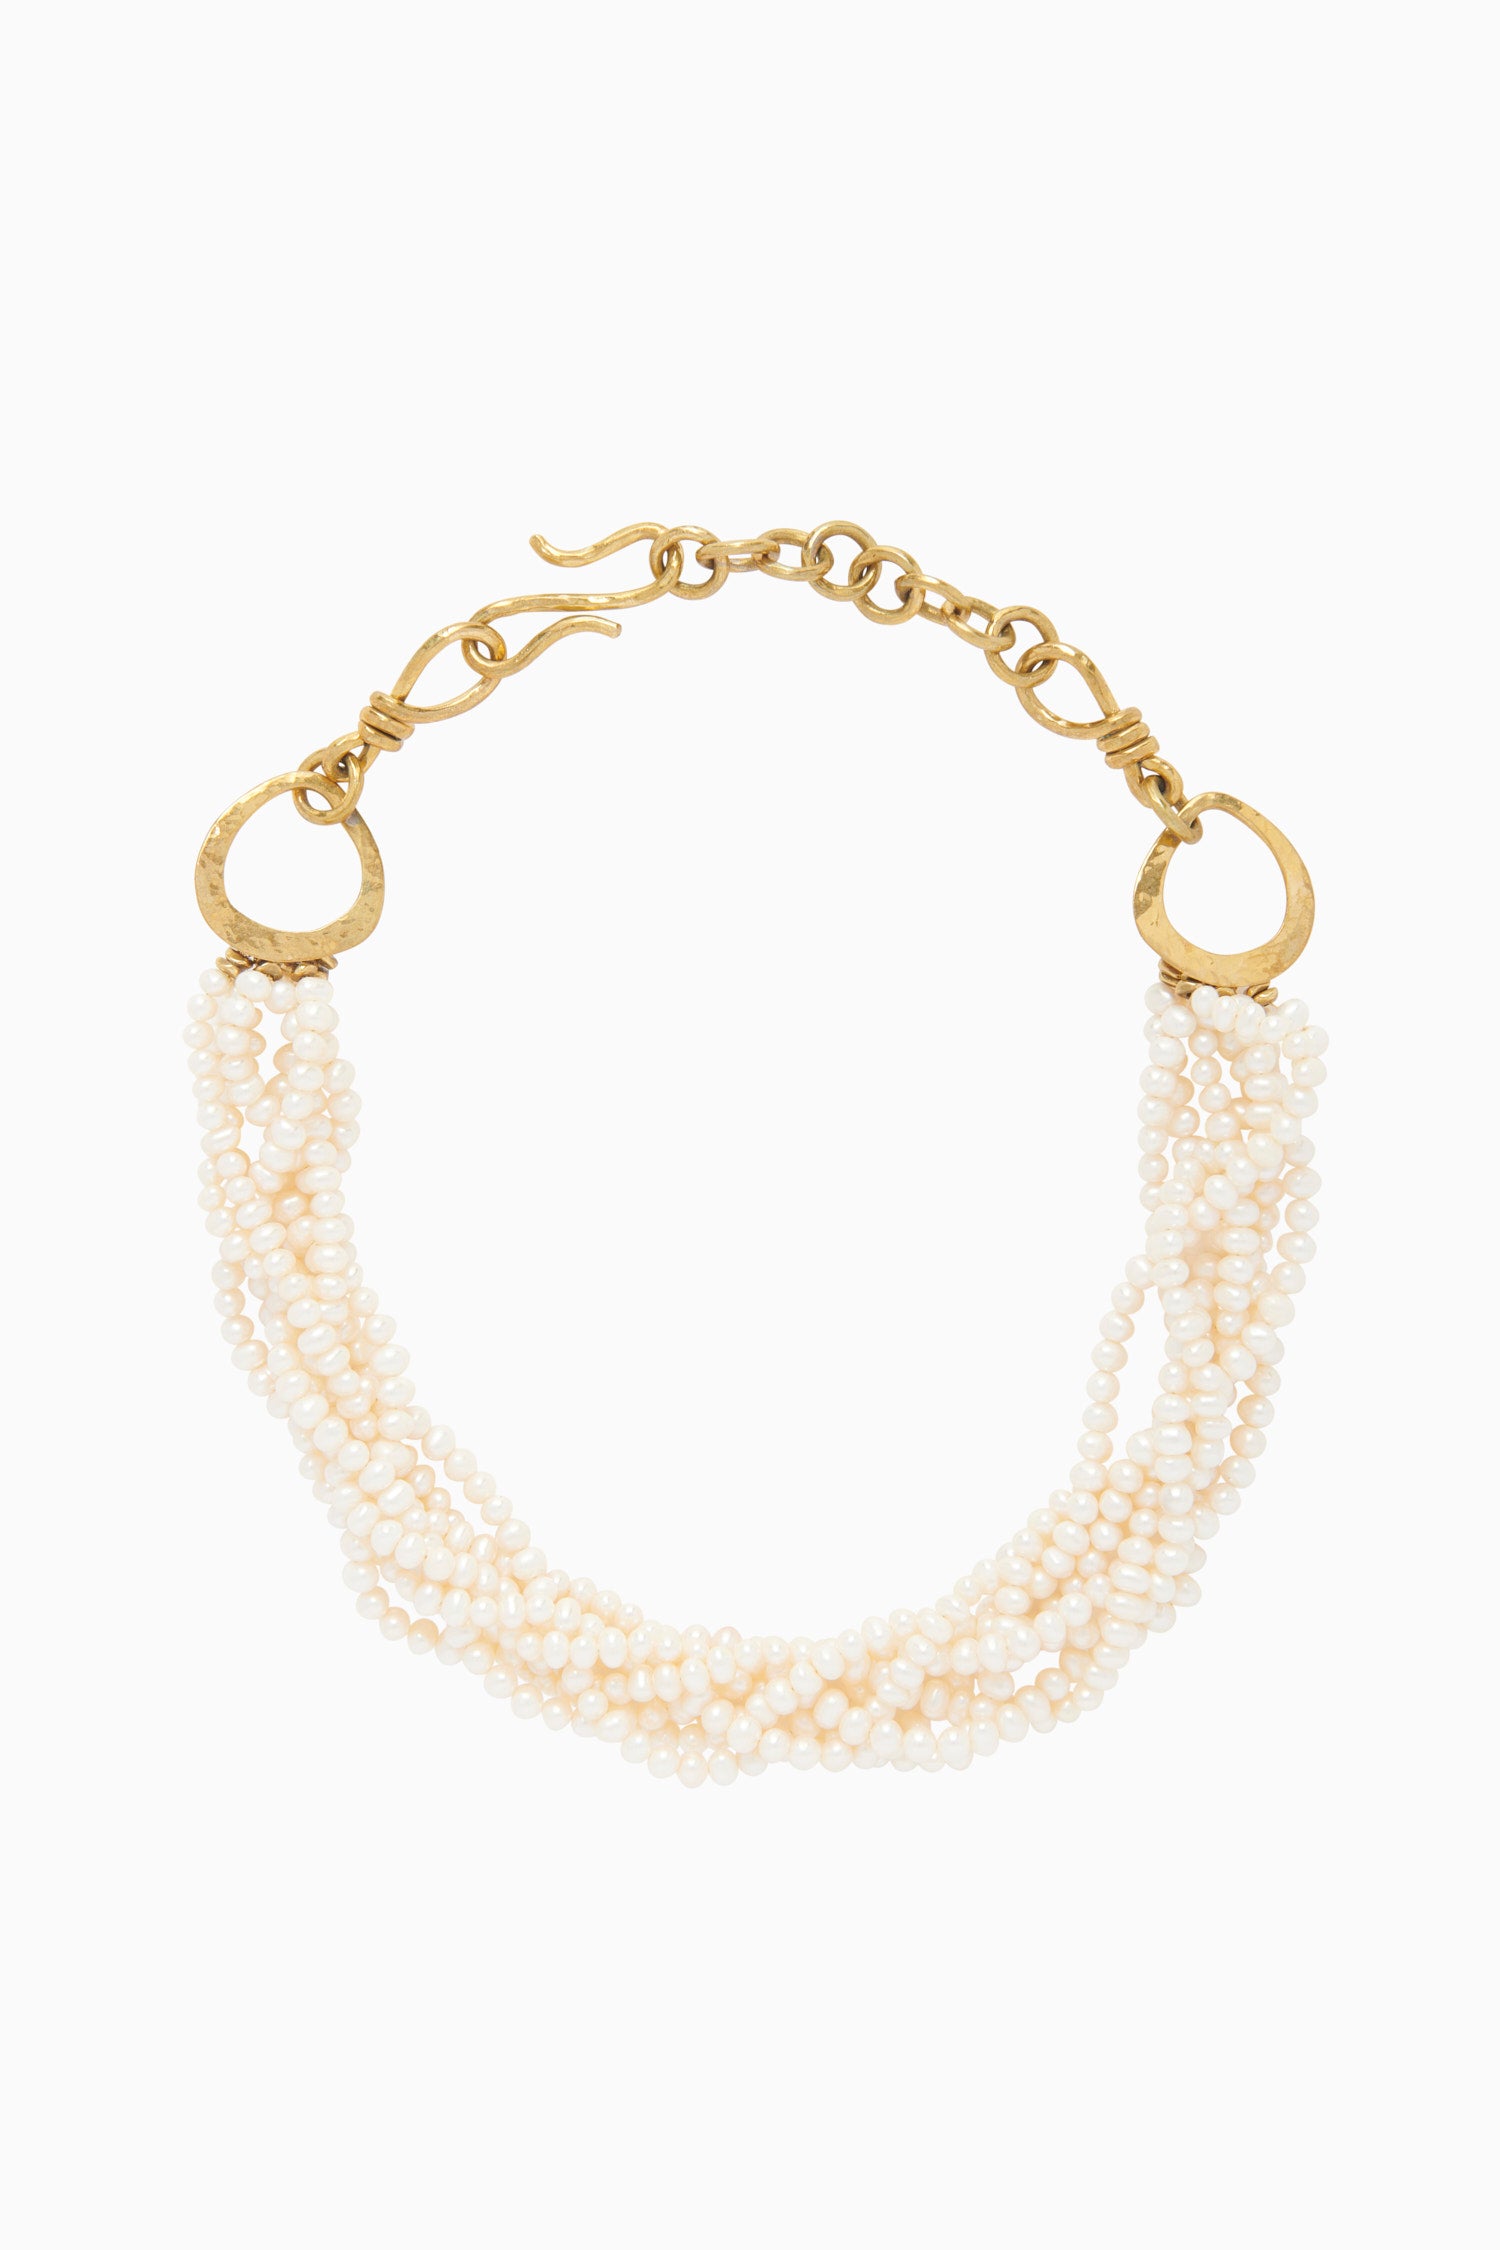 Ulla Johnson Hand Braided Pearl Necklace - Pearl